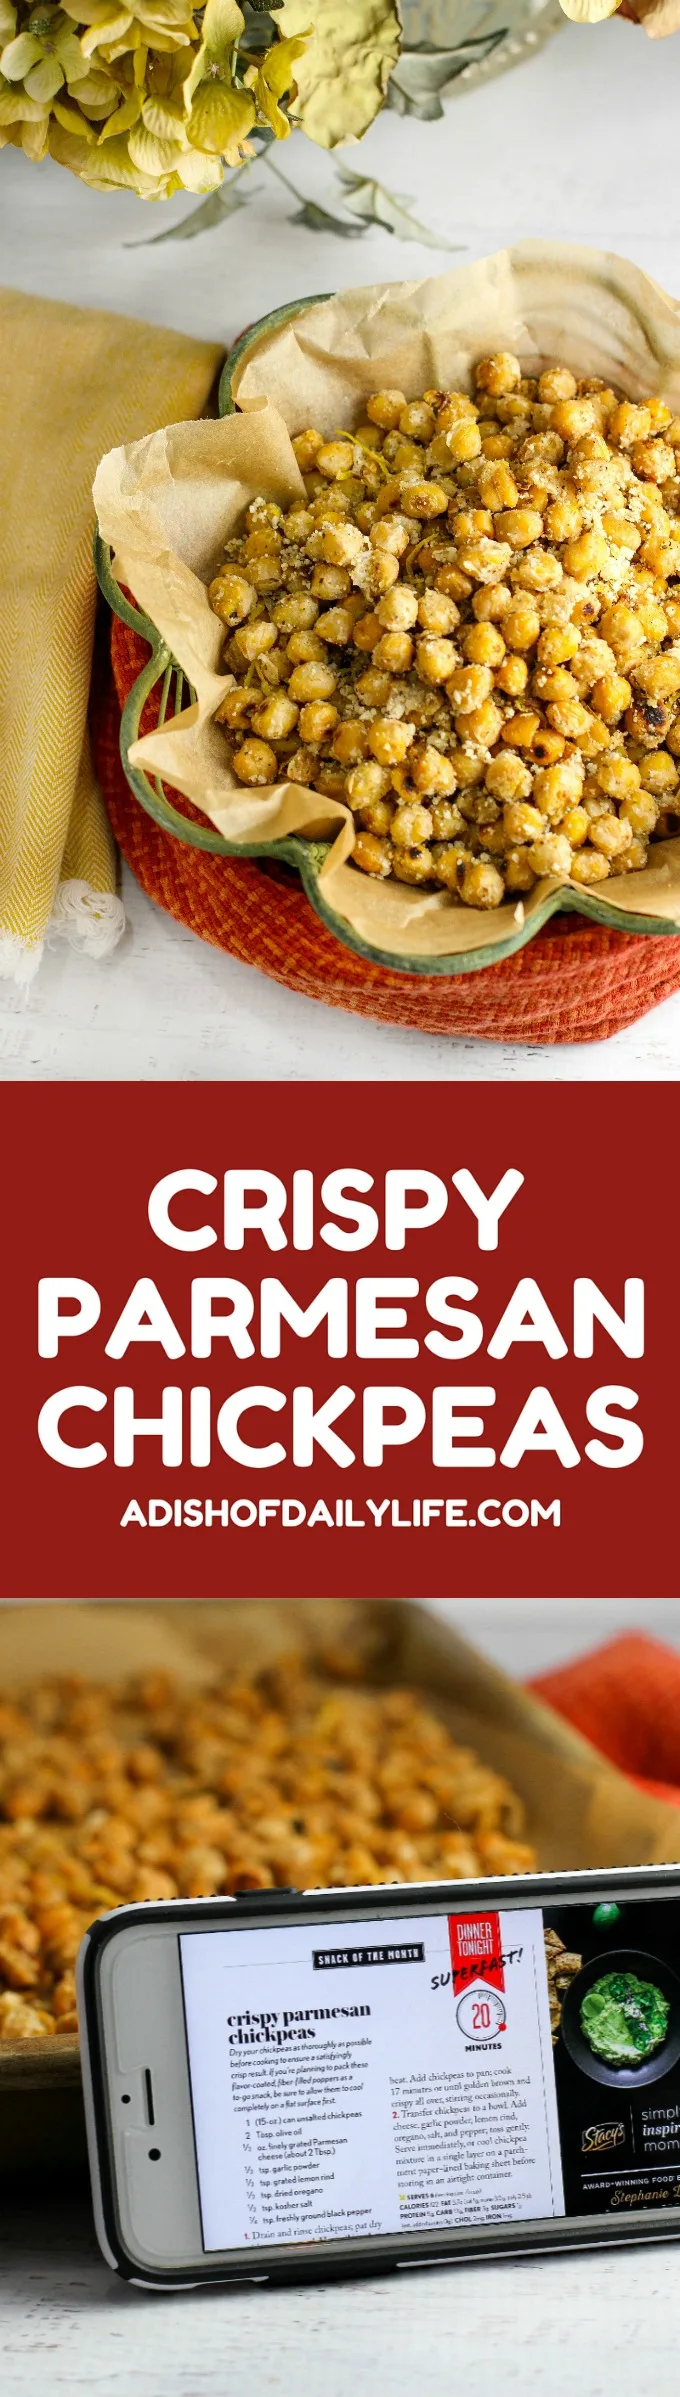 If you are looking for an easy-to-make healthy and delicious snack recipe, you have to try these Crispy Parmesan Chickpeas! I'm sharing this recipe with you today via the Texture Magazine App and Cooking Light. The Texture Magazine app gives you unlimited digital access to hundreds of the best magazines, including back issues and digital content, on your smartphone or tablet. For those that are foodies like me, it includes 26 food and cooking magazines that you know and love, like Cooking Light, Food & Wine, Clean Eating, plus great magazines that offer special diet options, like Vegetarian Times and Gluten-Free Living. Try it out with a free trial today!